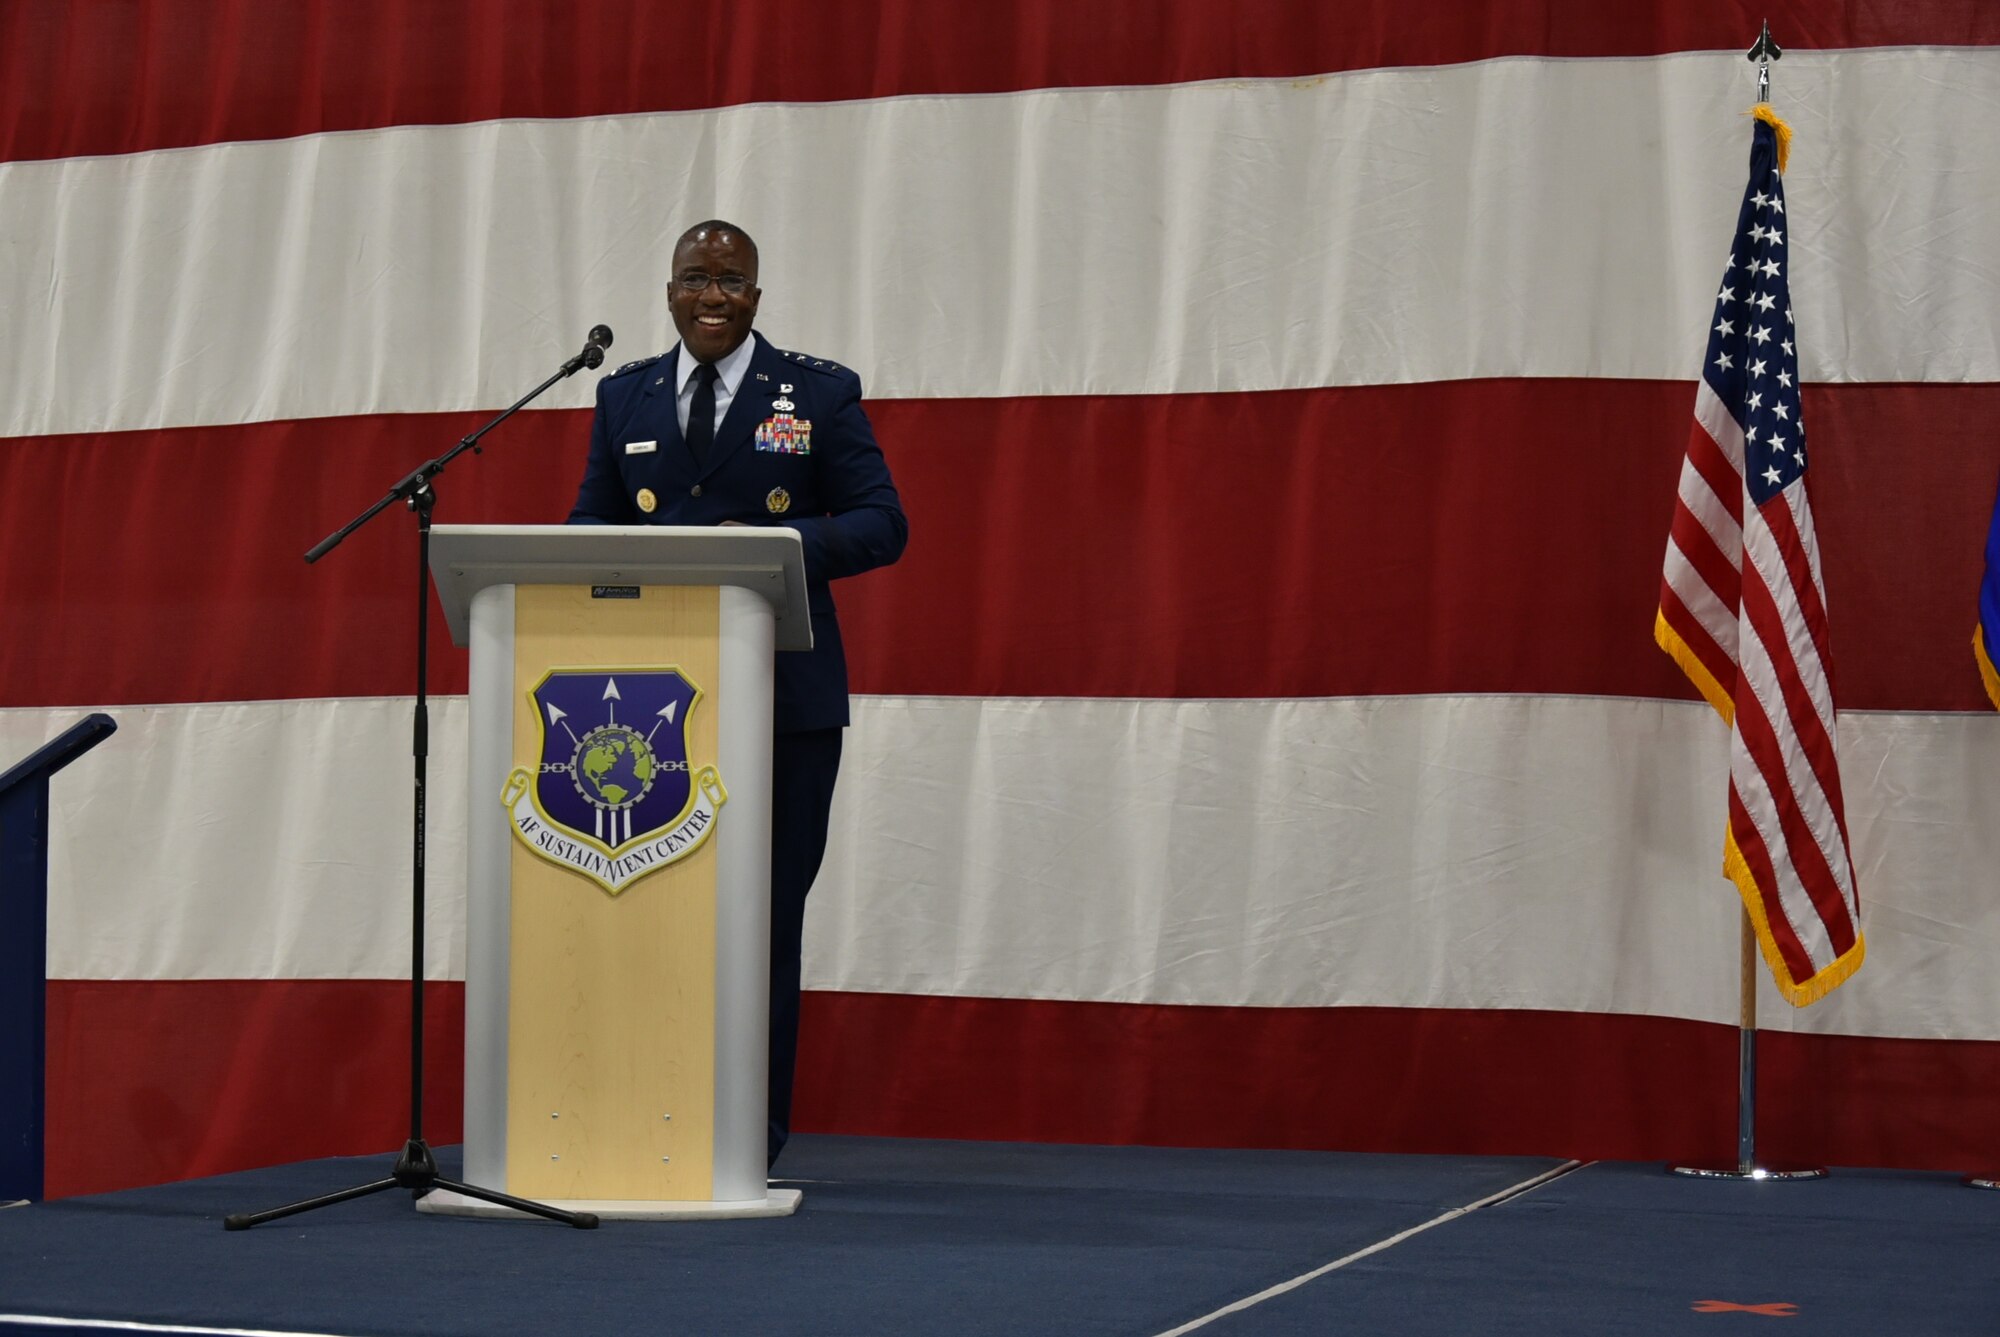 220815-F-UR719-4044
Lt. Gen. Stacey T. Hawkins addresses the crowd after taking command of the Air Force Sustainment Center during a change of command ceremony at Tinker Air Force Base, Oklahoma, Aug. 15, 2022.